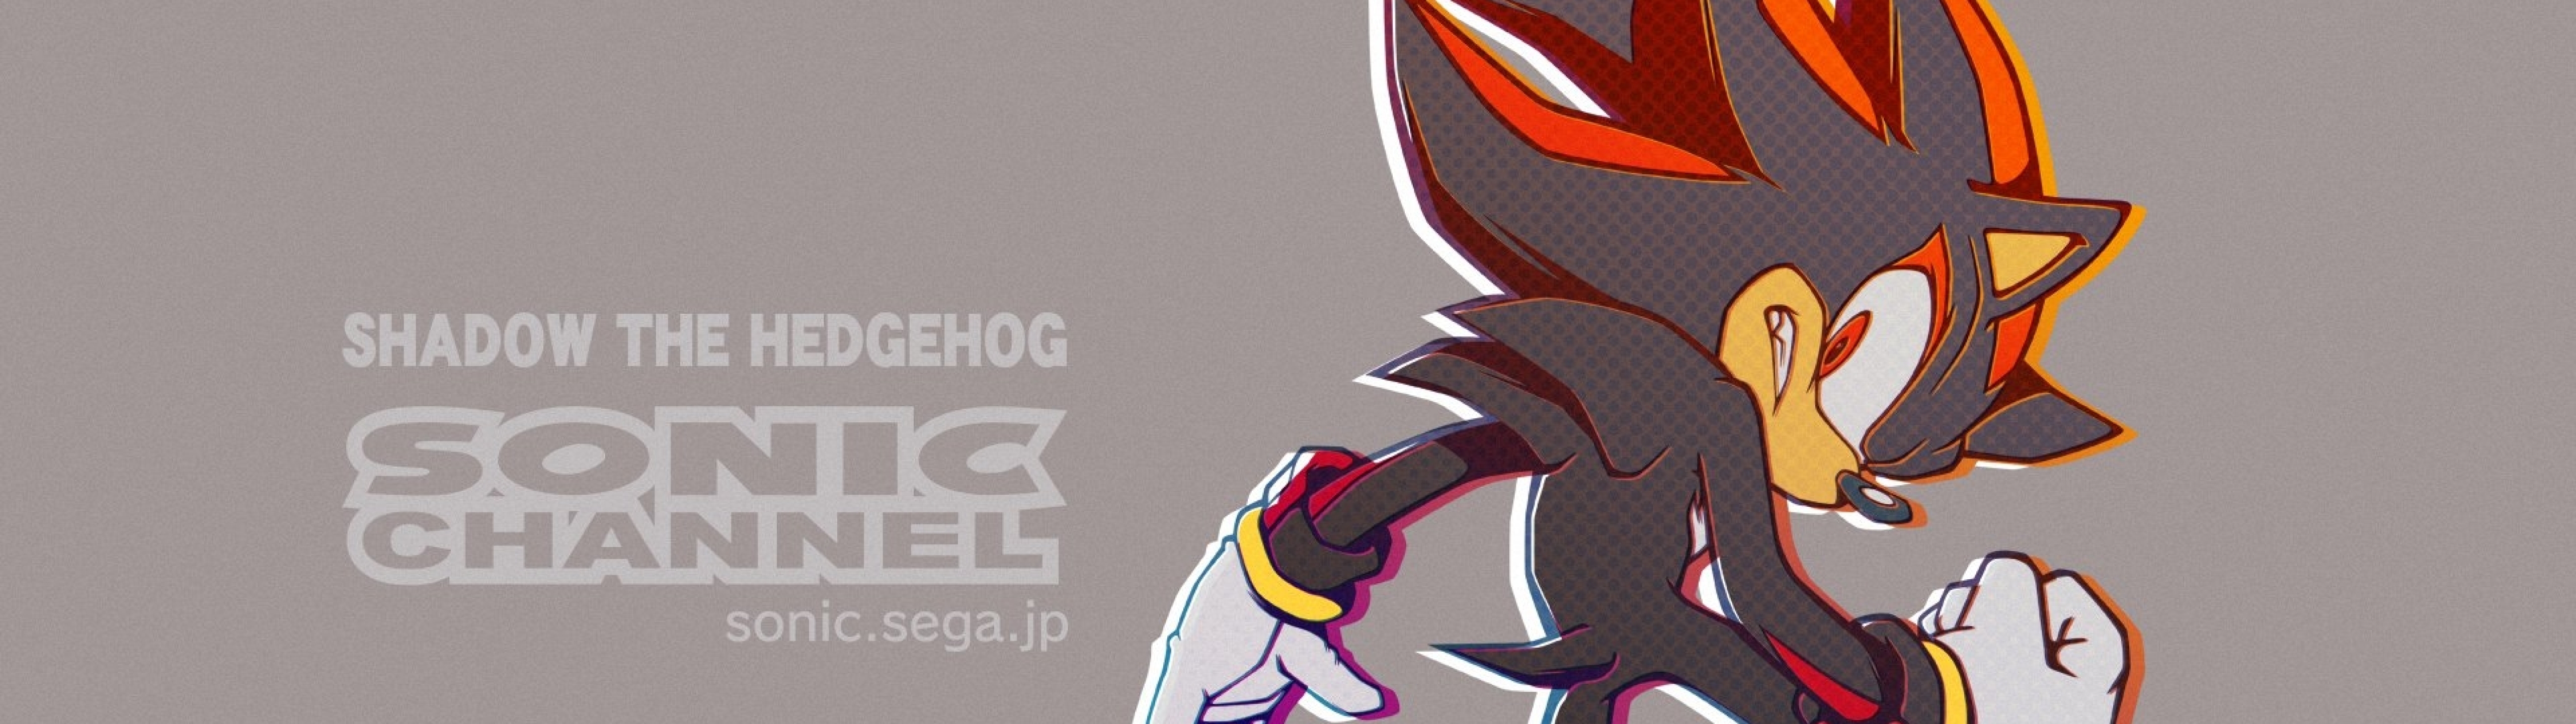 219440 3000x1846 Shadow the Hedgehog - Rare Gallery HD Wallpapers